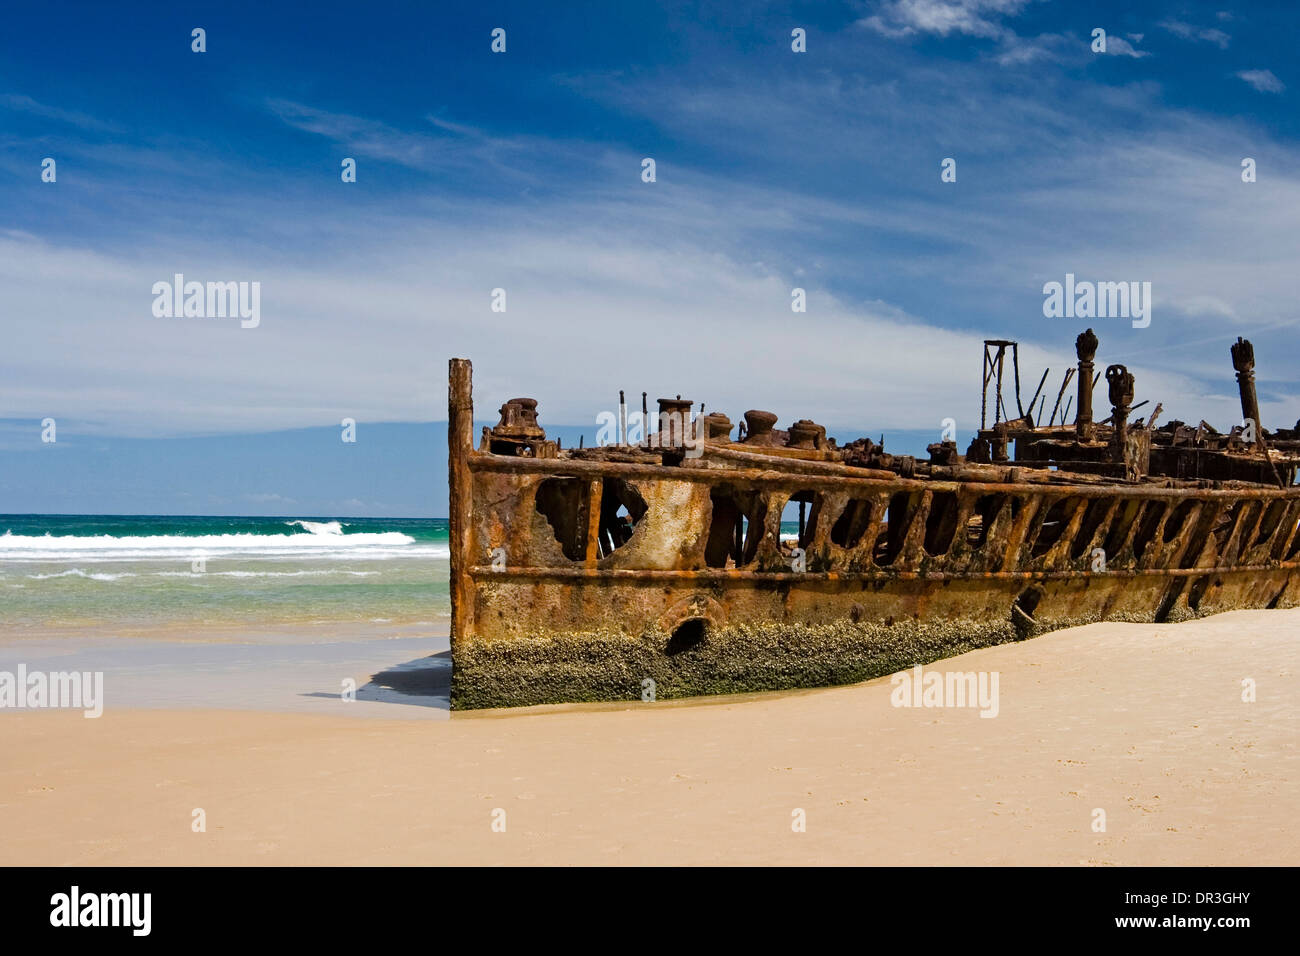 Rusting remains of the luxury liner Maheno wrecked on beach at Fraser Island Queensland Australia Stock Photo